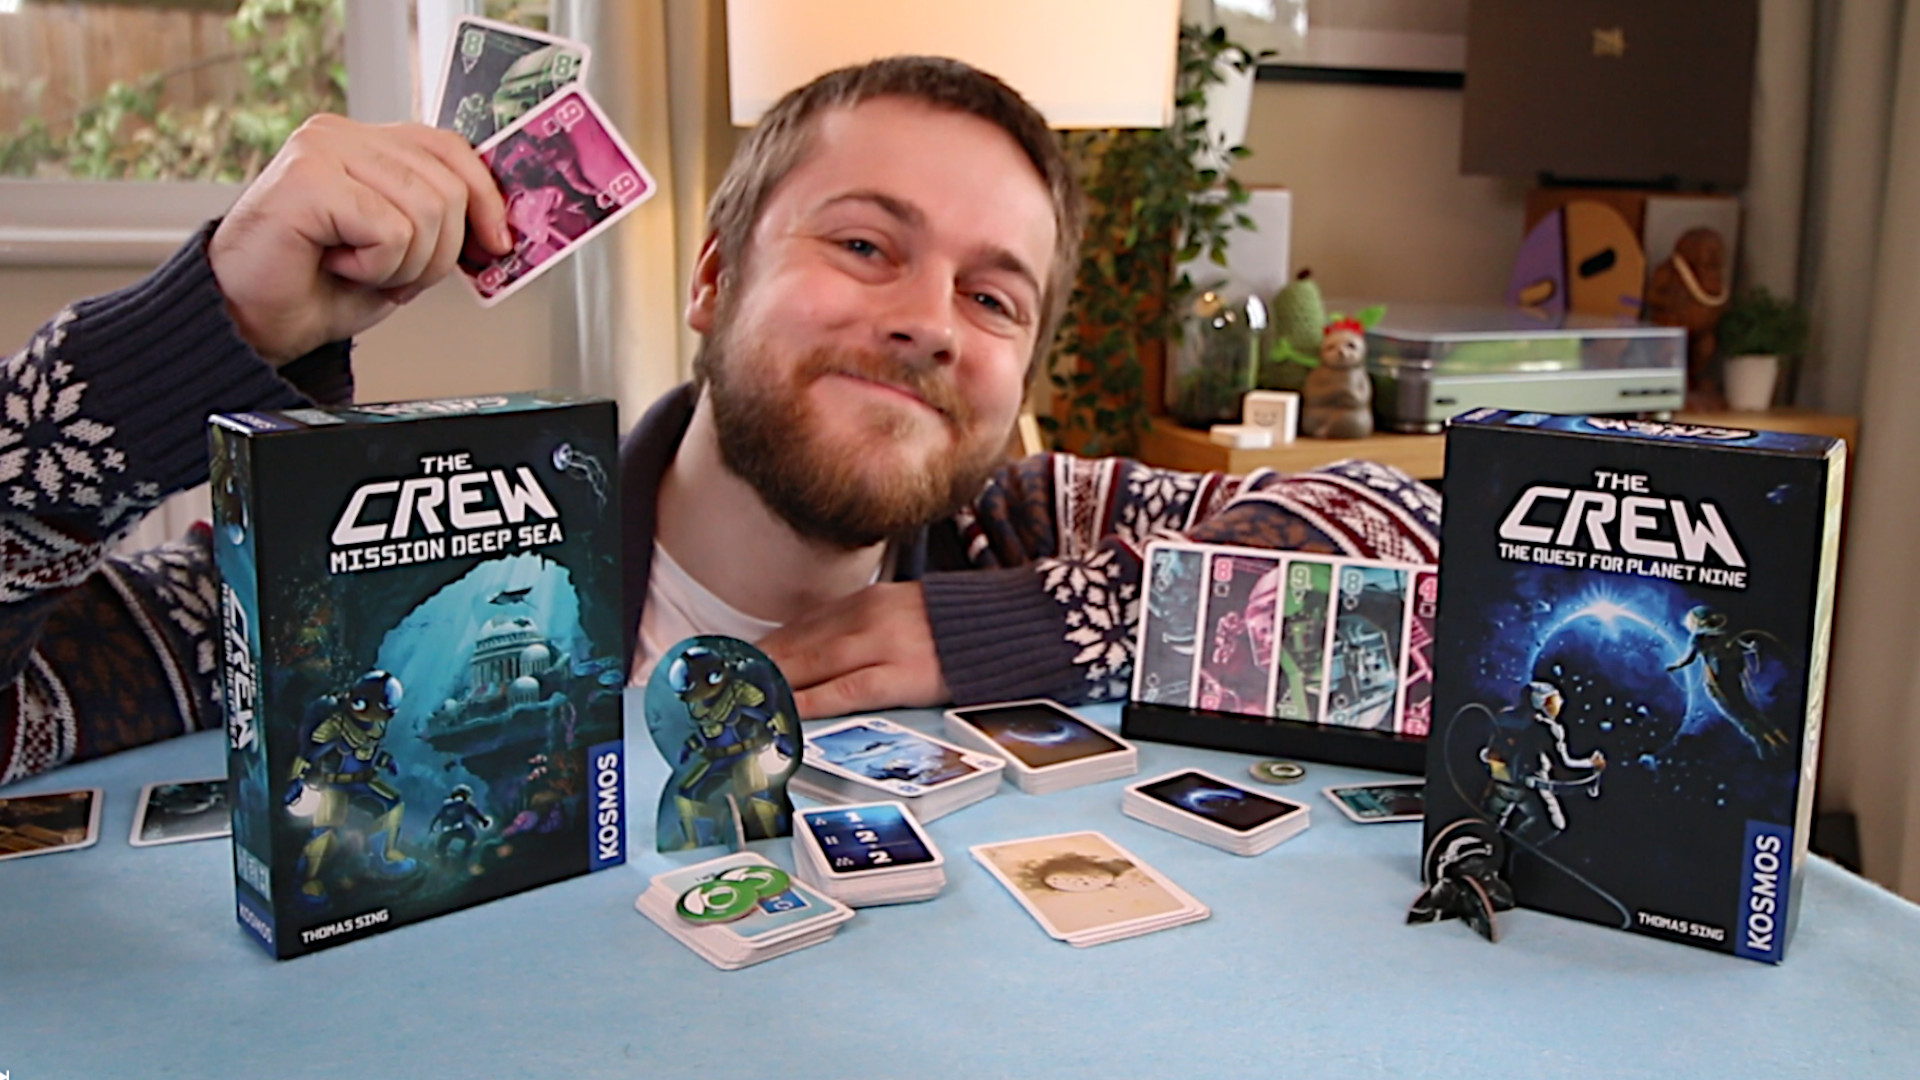 The Crew: The Quest For Planet Nine Review - Board Game Review